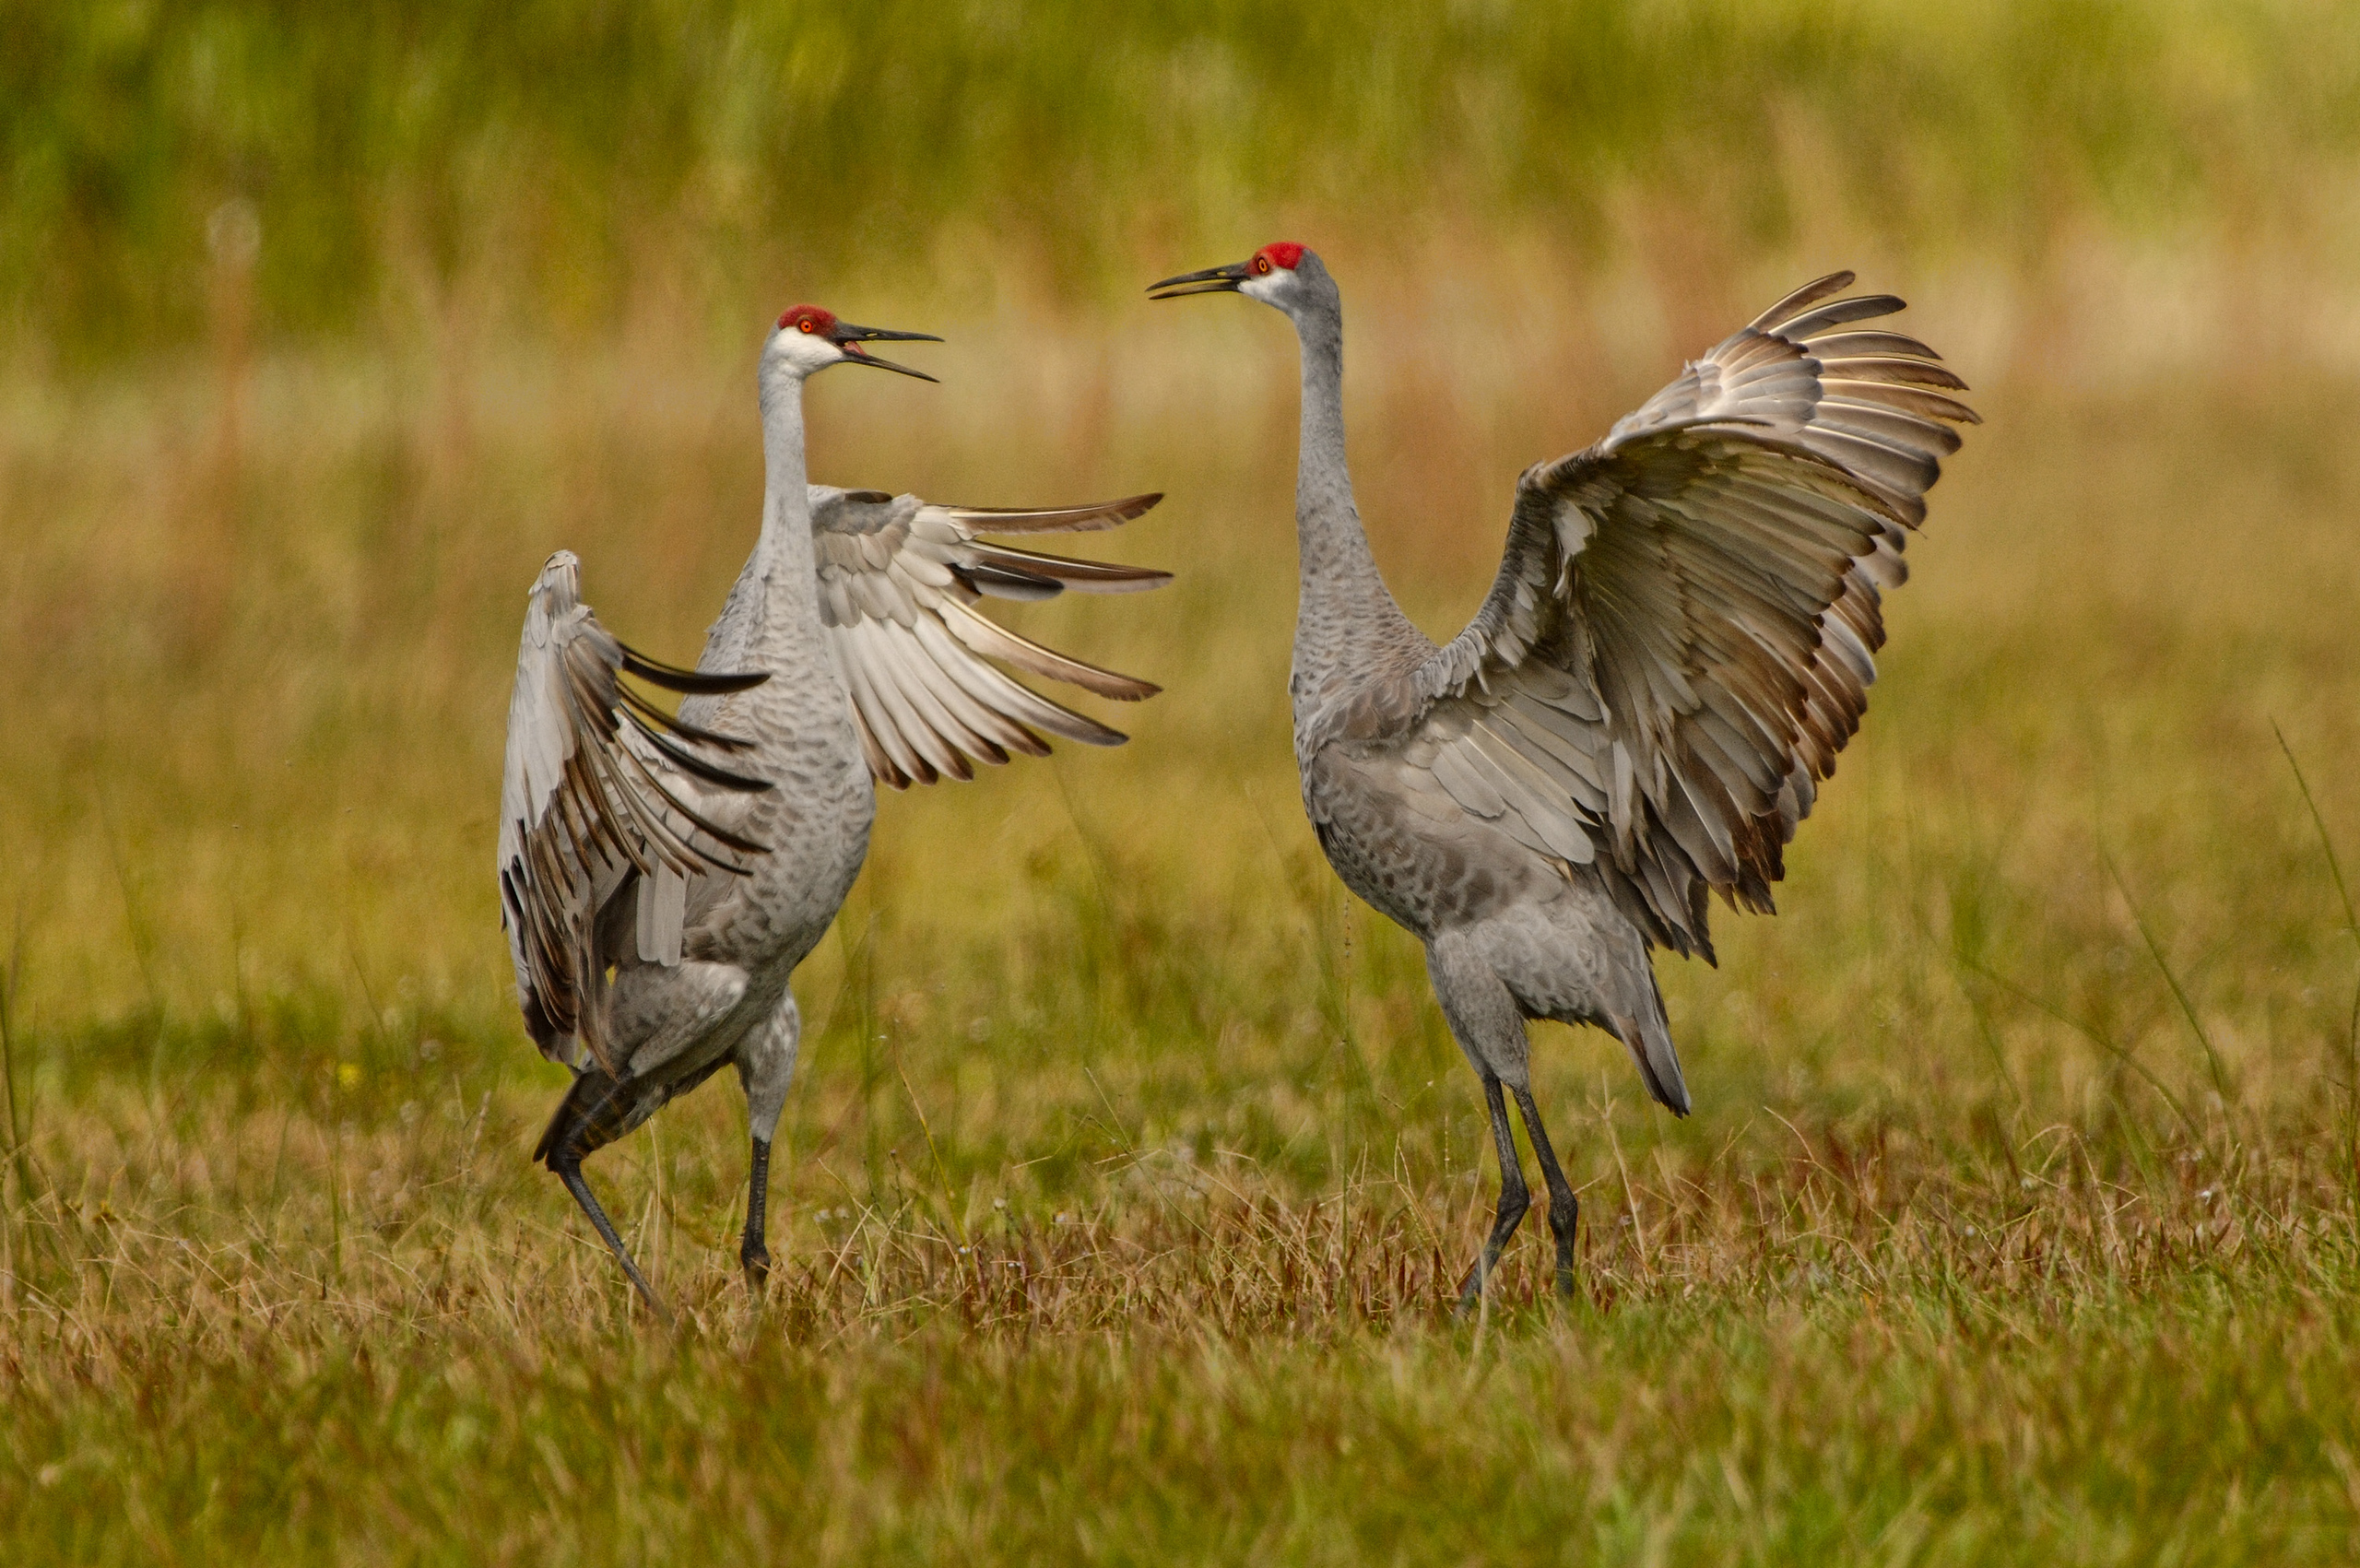 Two Sandhill Cranes with wings outstretched in a grassy field.